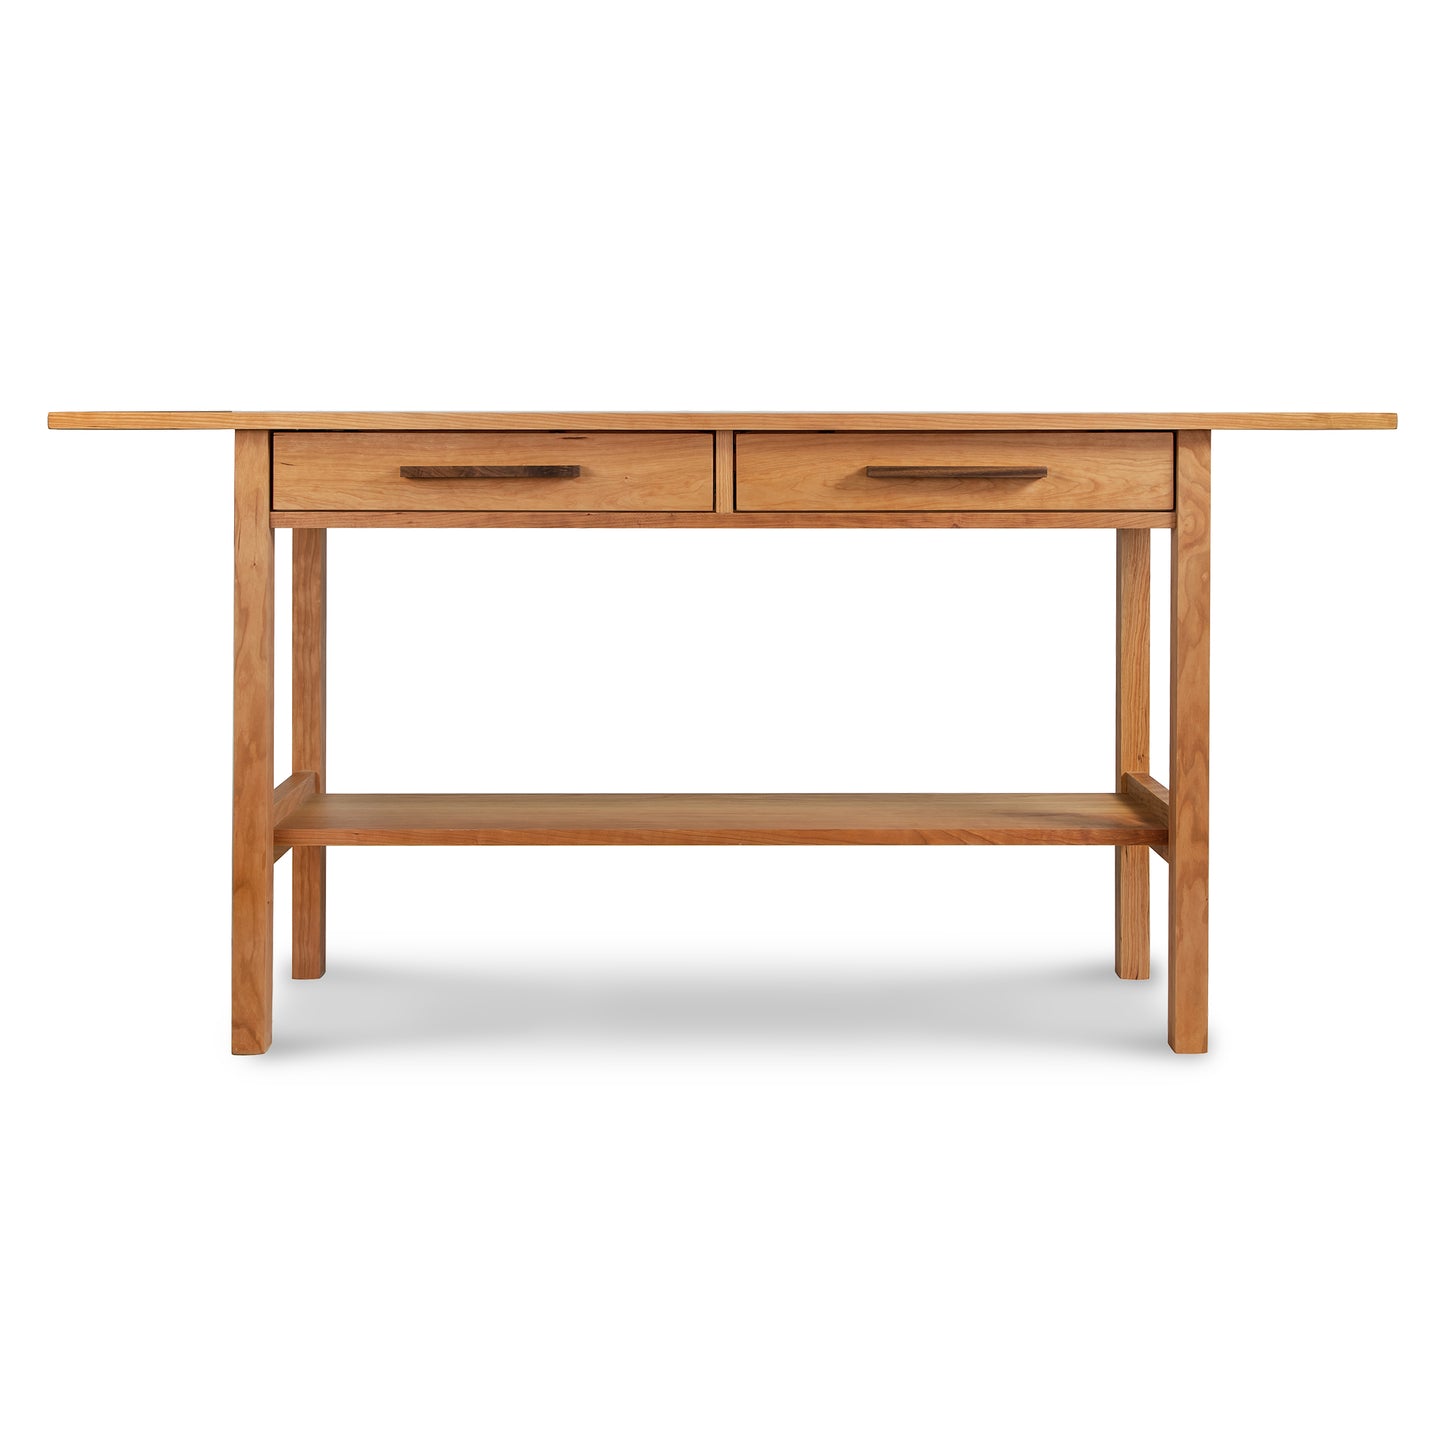 A handcrafted Modern Craftsman 2-Drawer Console Table, made from sustainably sourced North American hardwoods by Vermont Furniture Designs, with two drawers and a lower shelf, isolated on a white background.